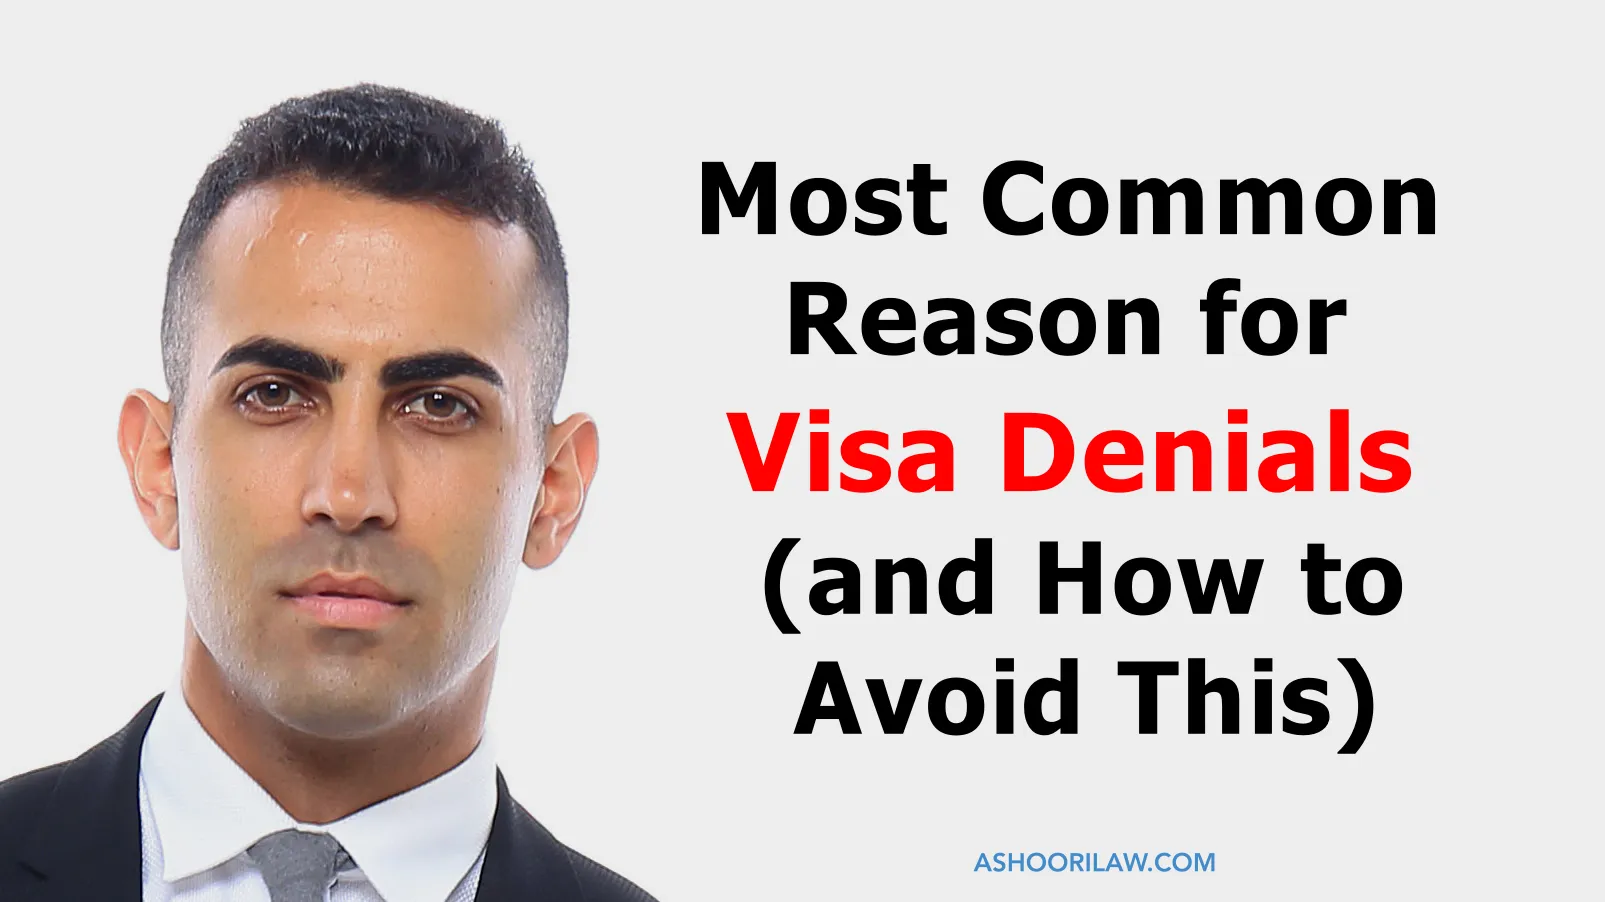 Most Common Reason for Visa Denials and How to Avoid This